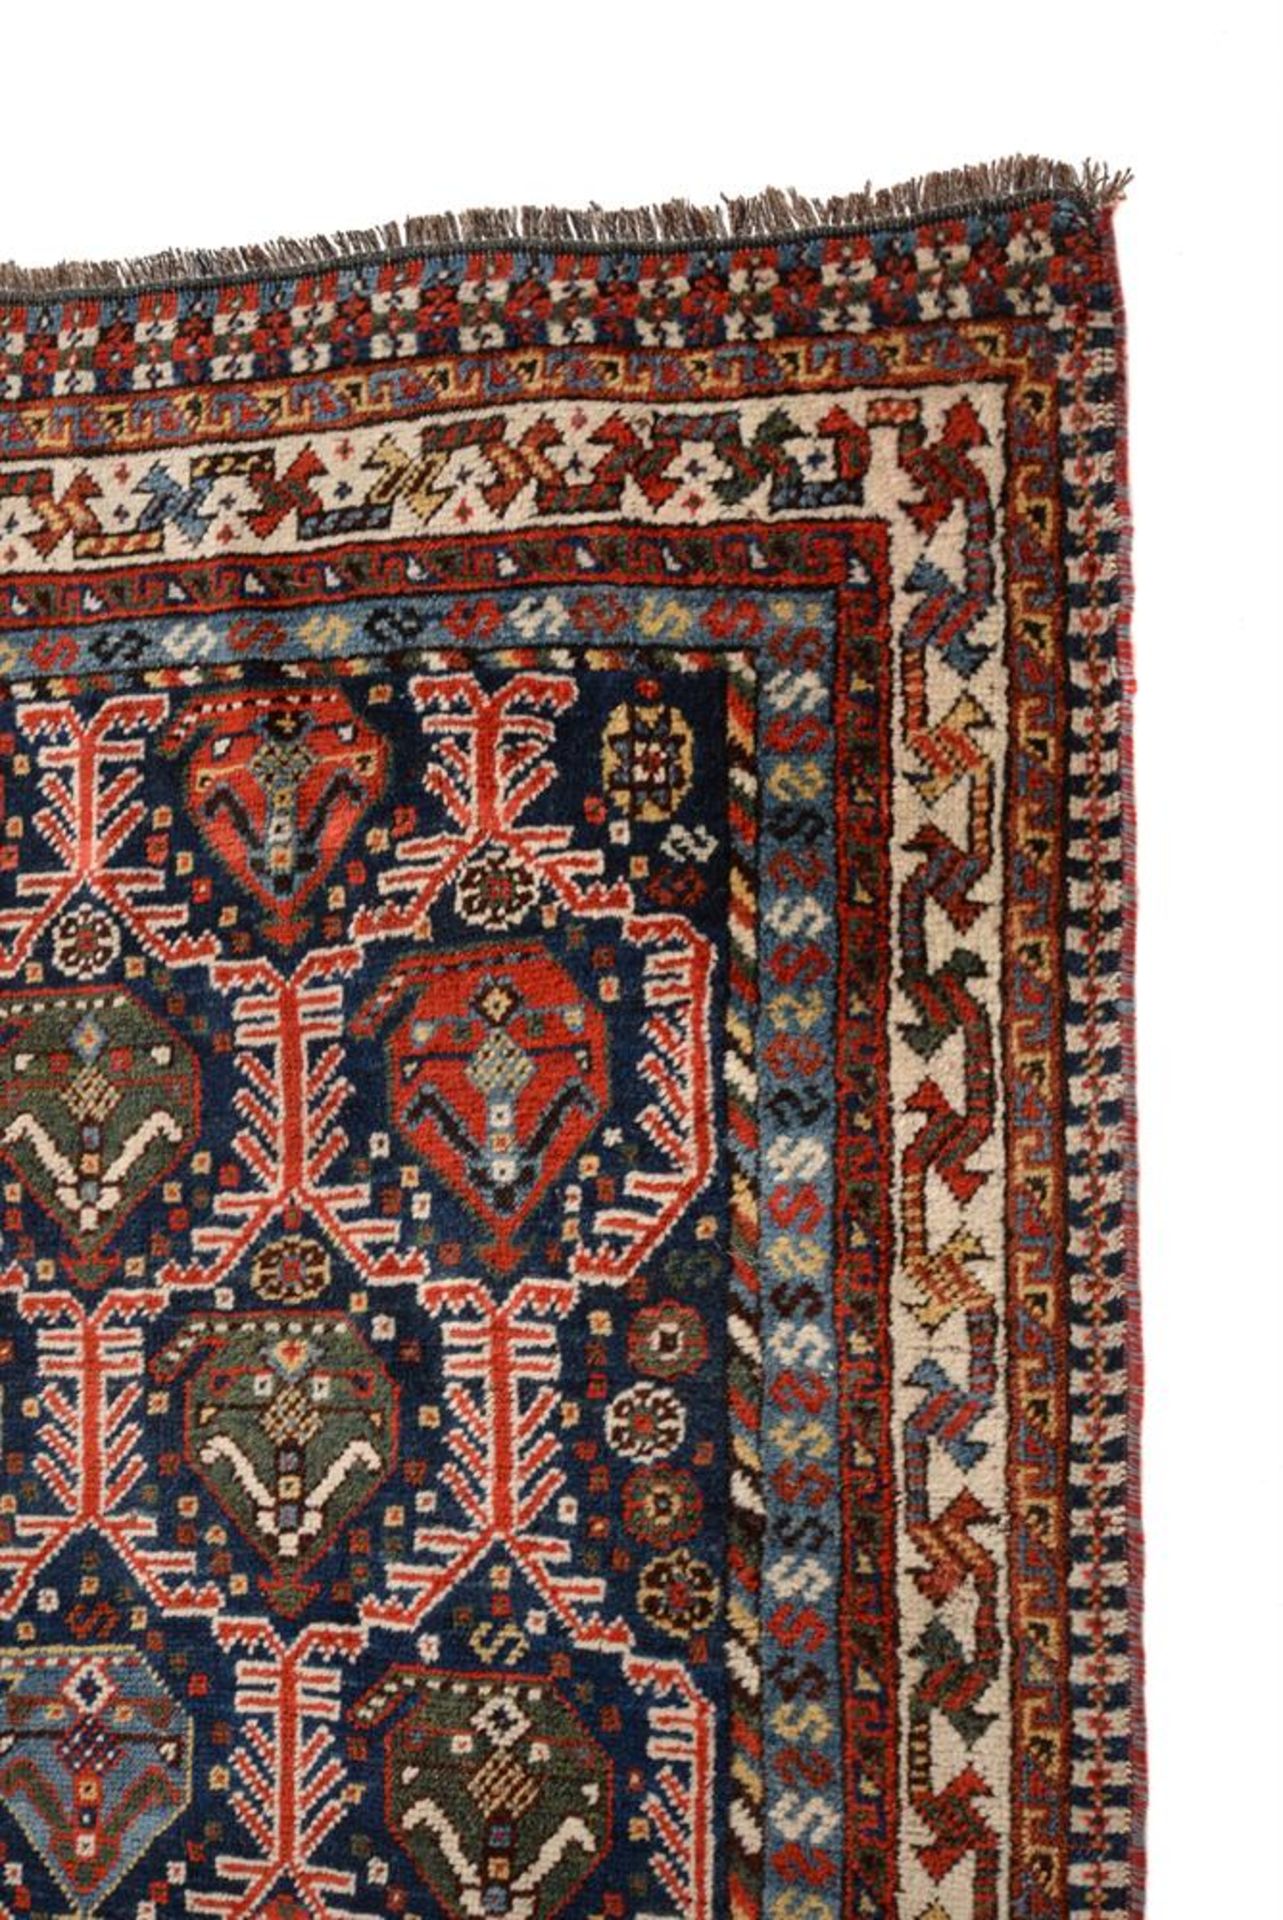 AN AFSHAR RUG, approximately 254 x 157cm - Image 3 of 3